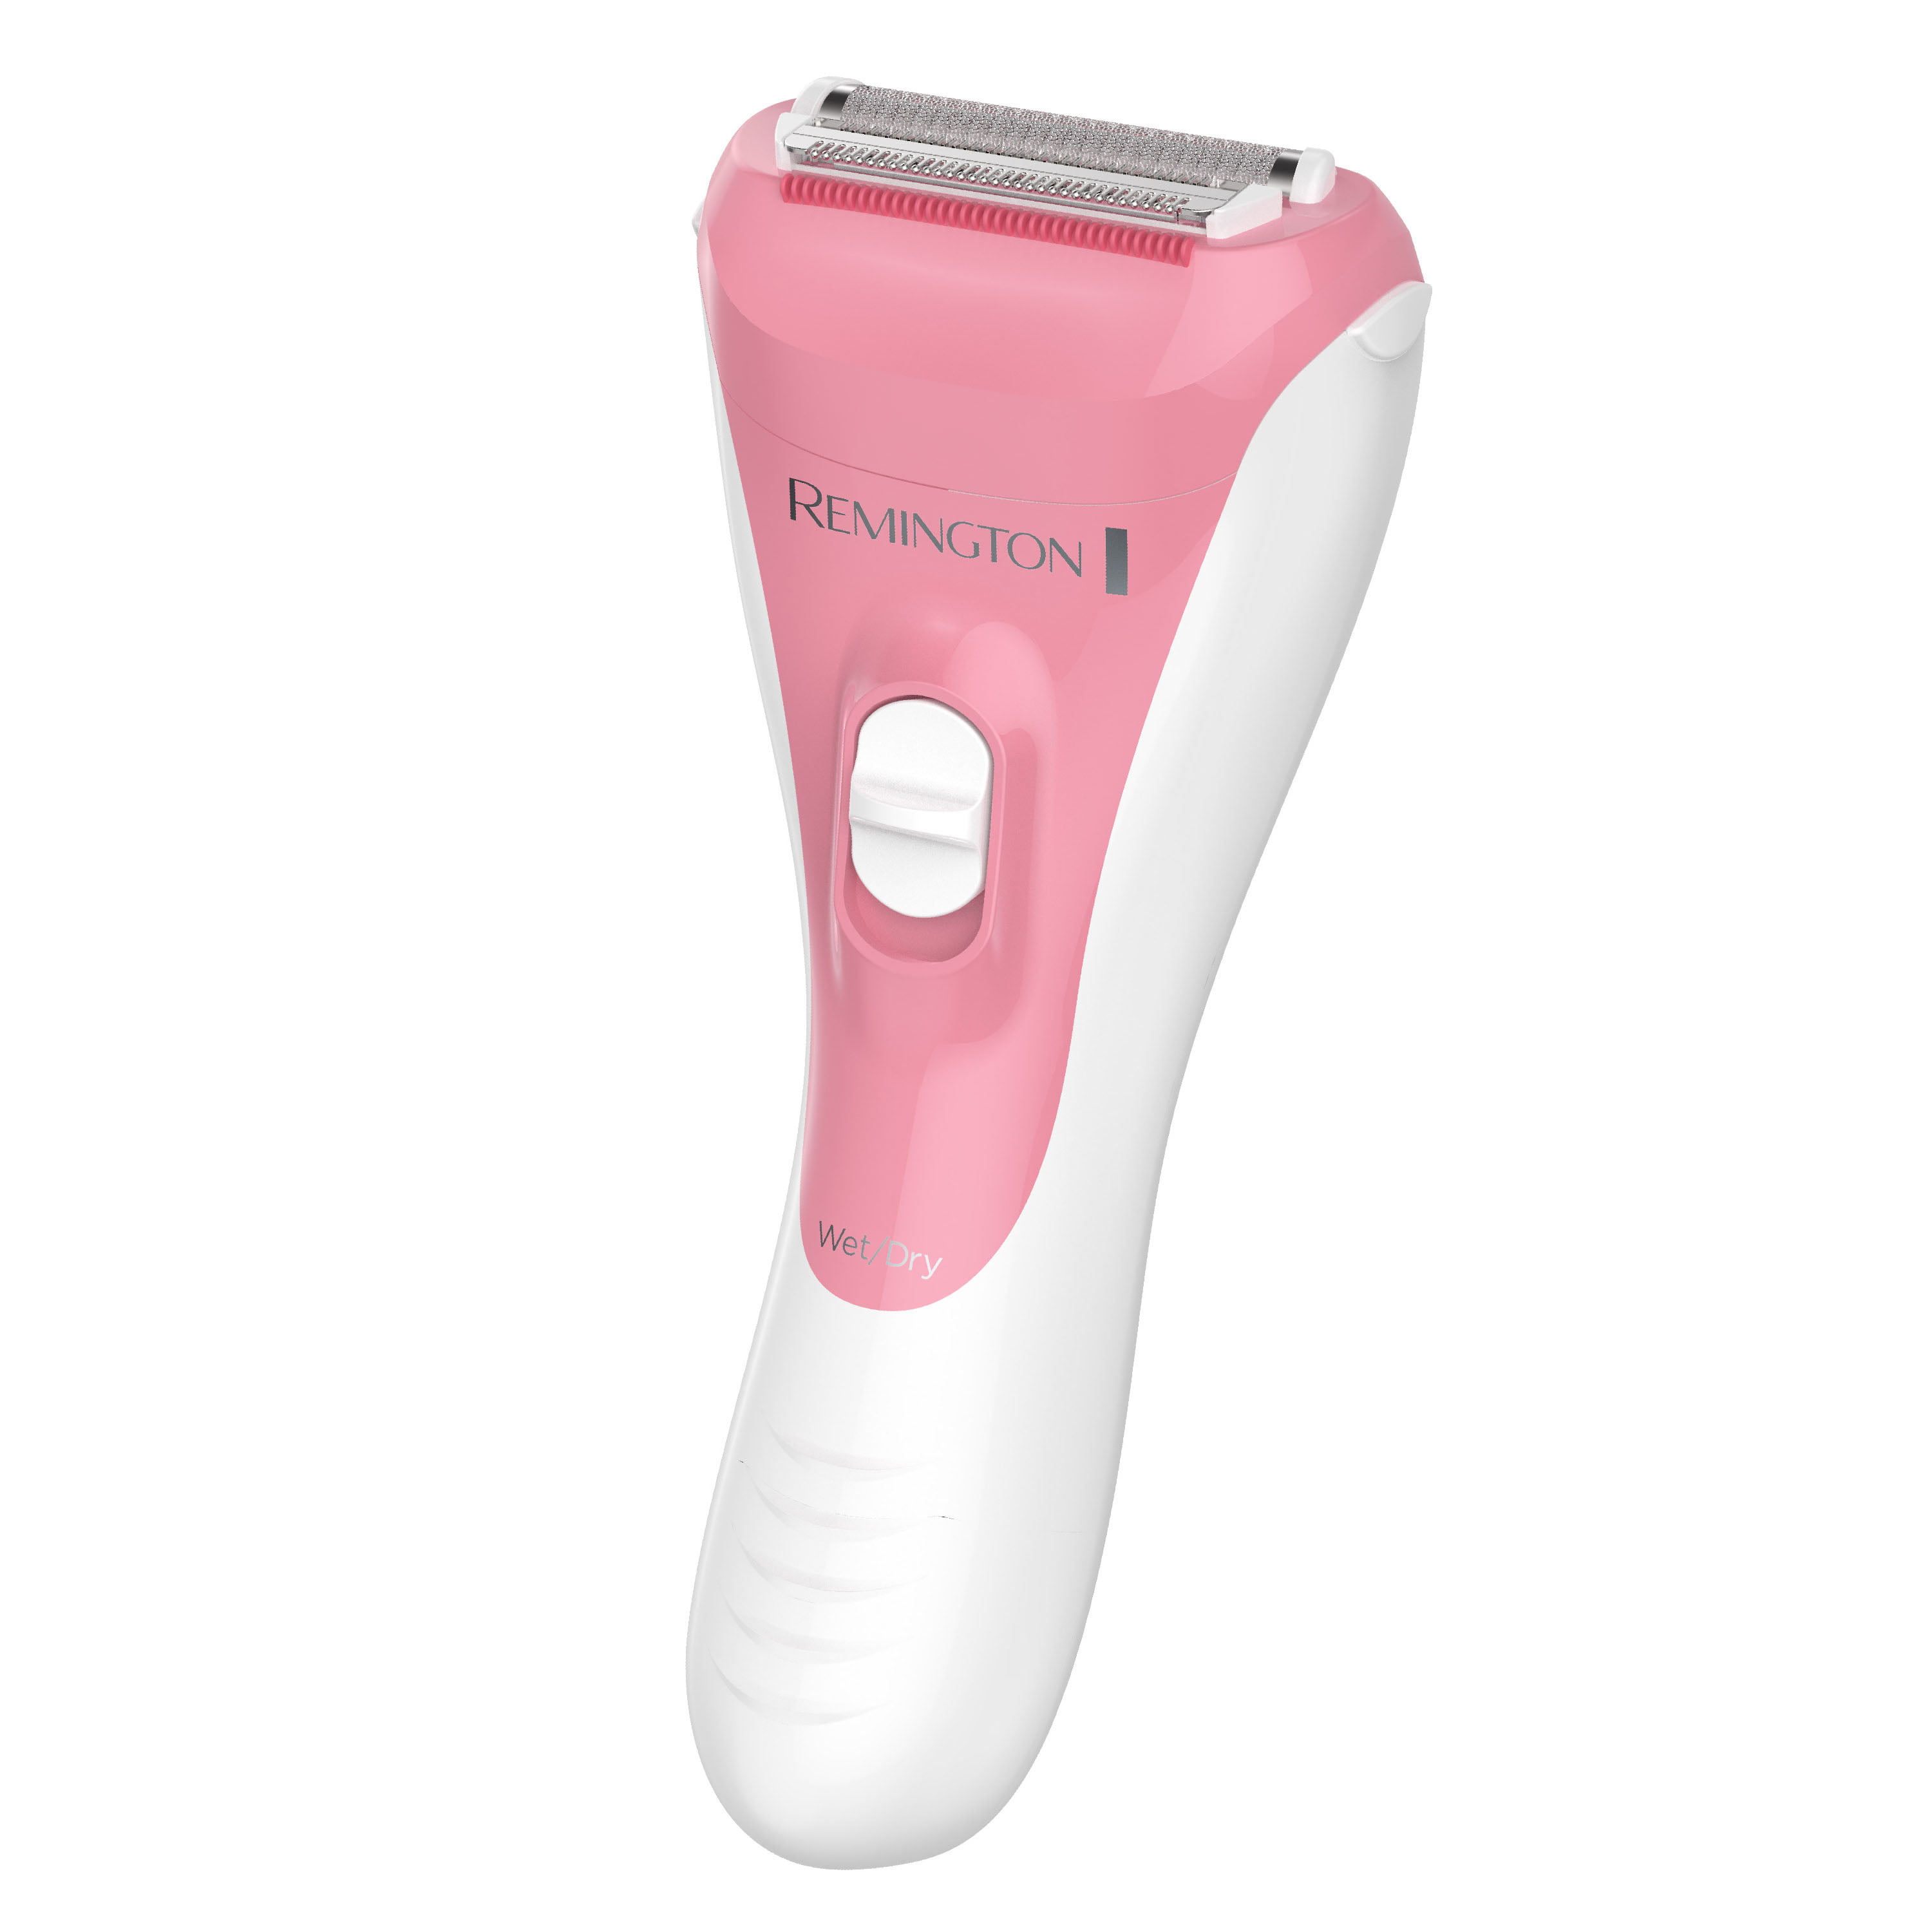 Rechargeable 3-Blade Shaver - Light Pink